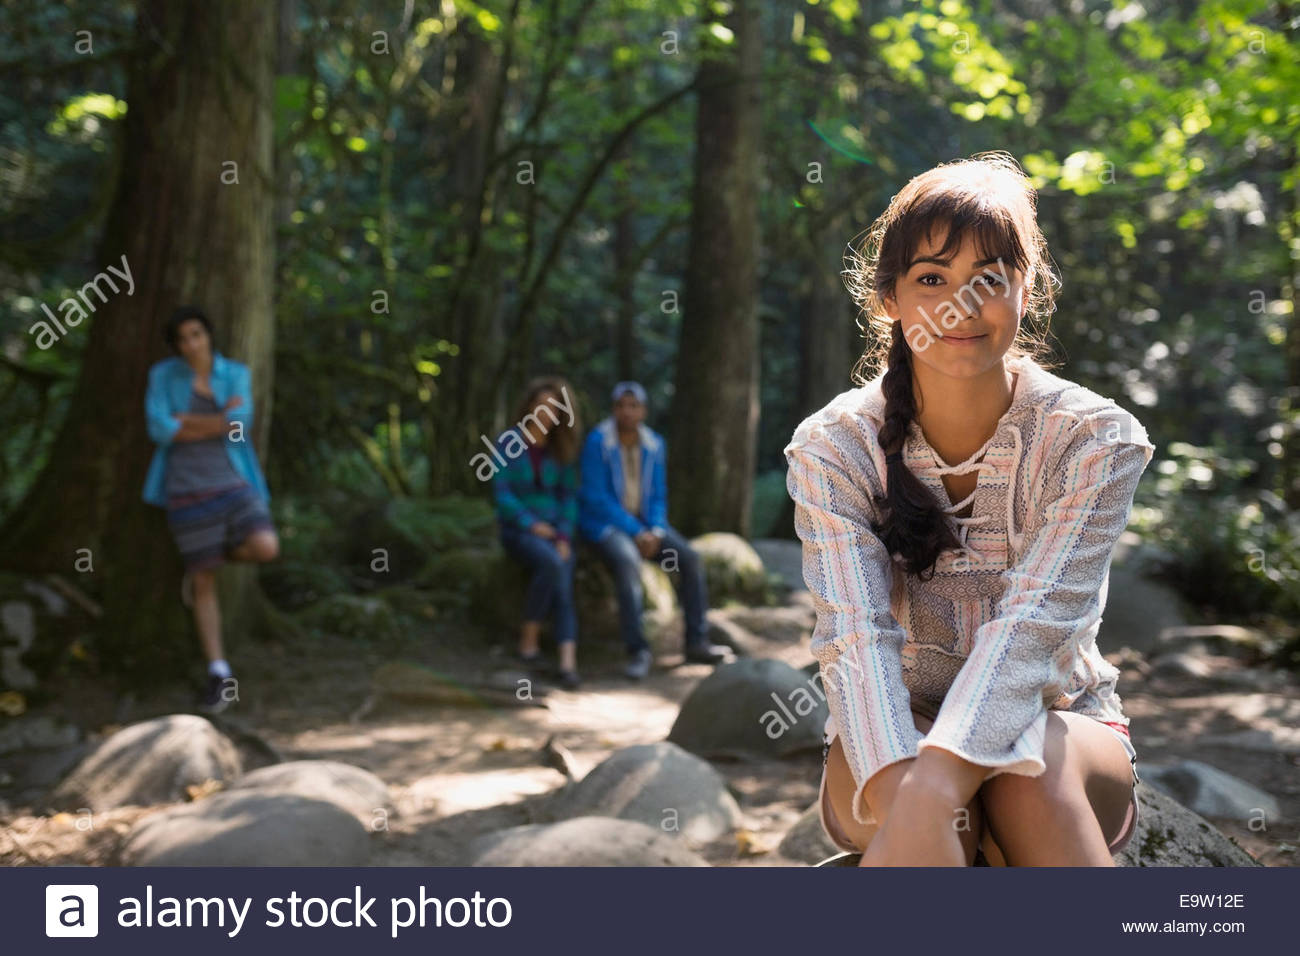 Portrait of smiling young woman in woods Banque D'Images